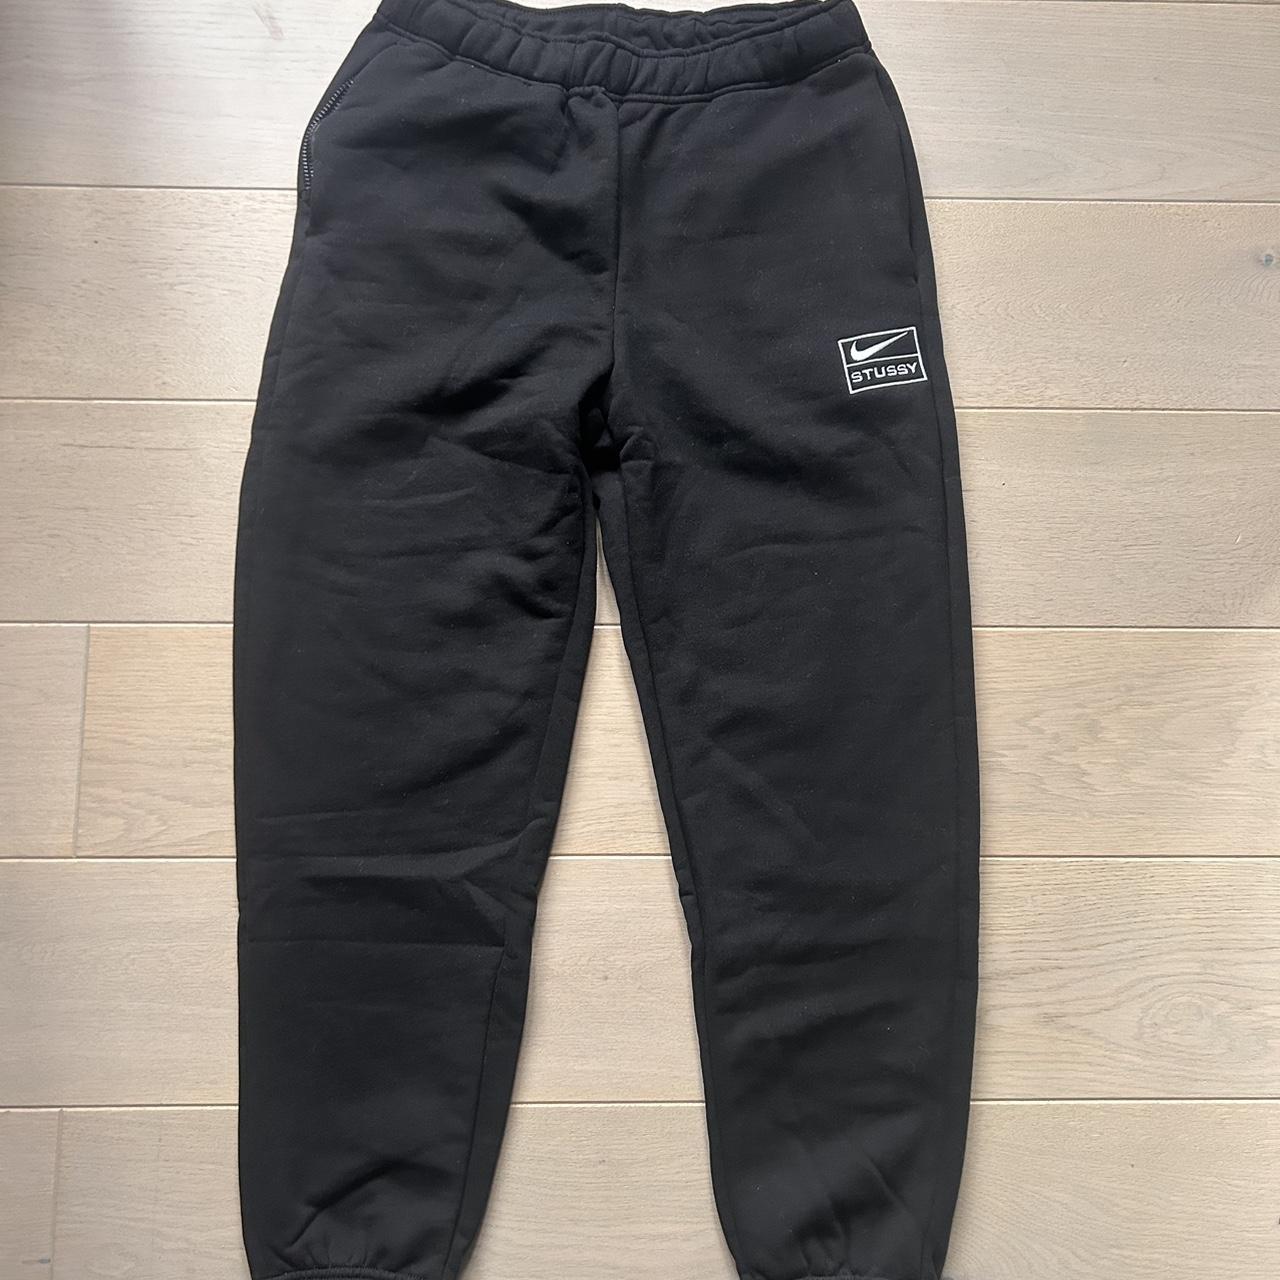 Black Nike stussy joggers. Perfect condition. - Depop